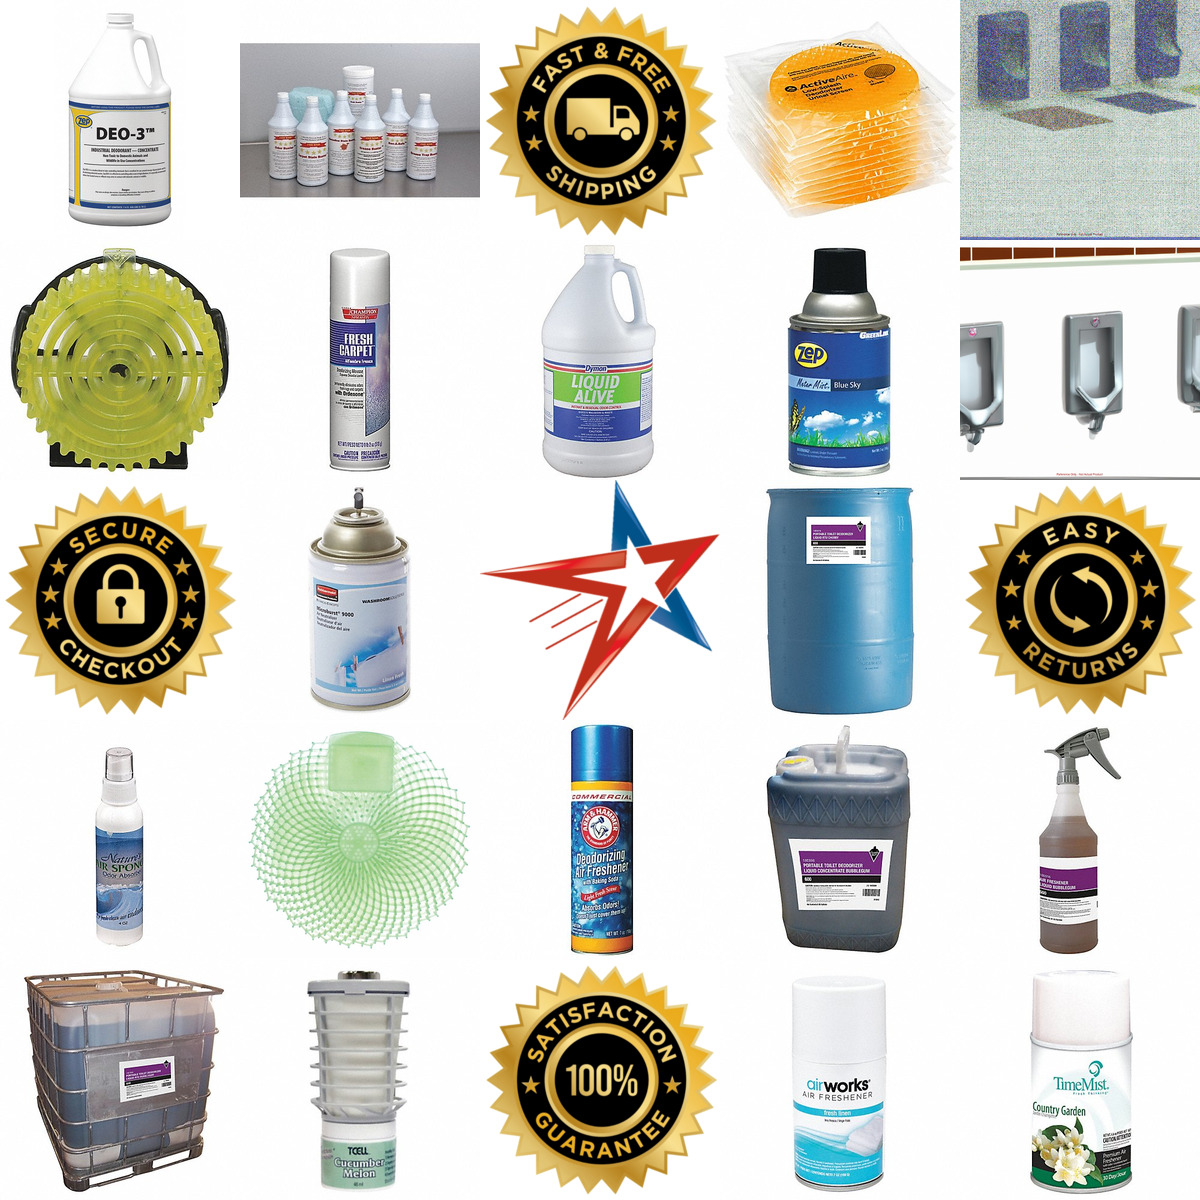 A selection of Odor Control products on GoVets